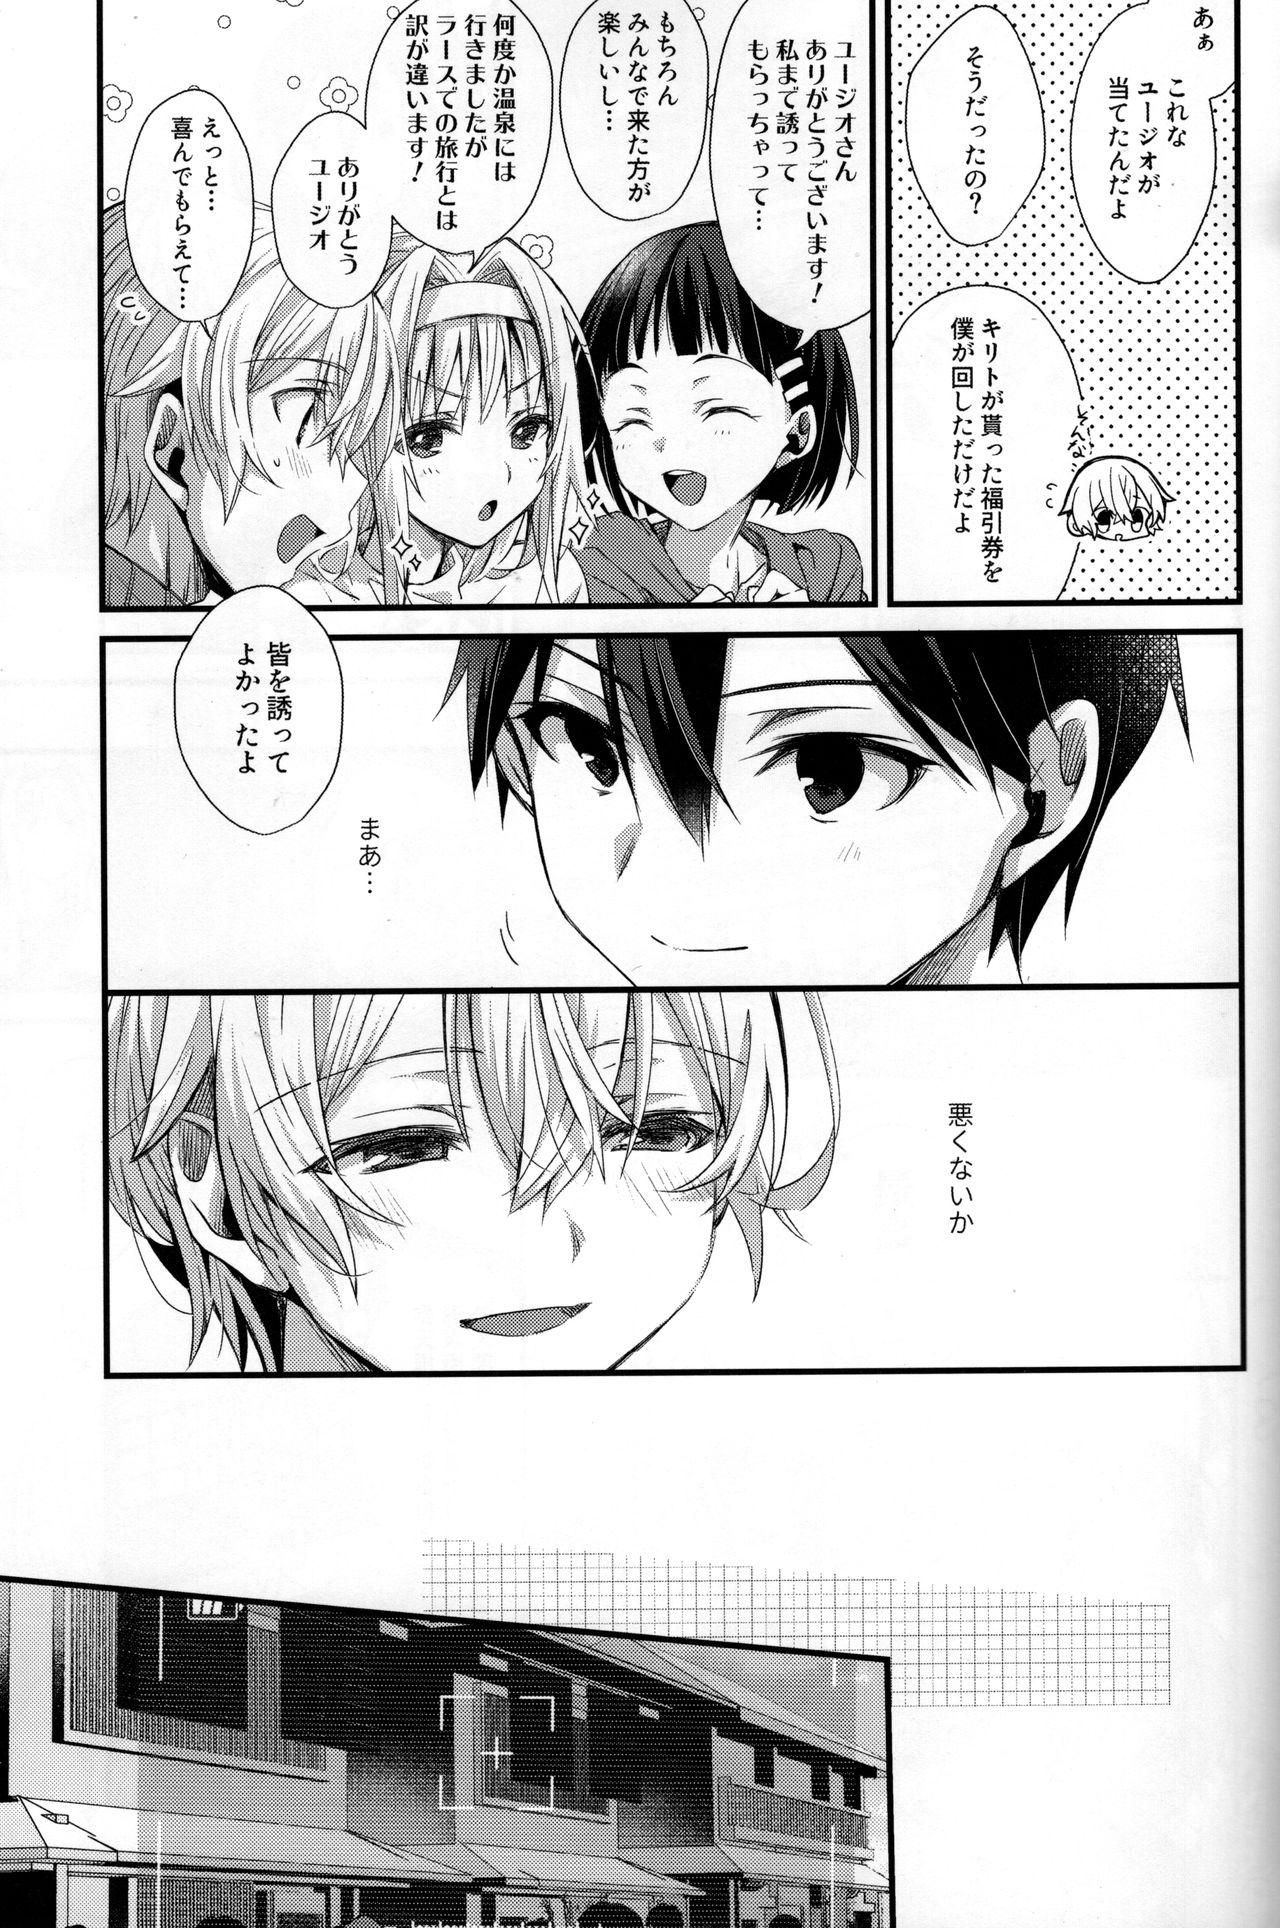 Gay 3some Close to you. - Sword art online Ebony - Page 7